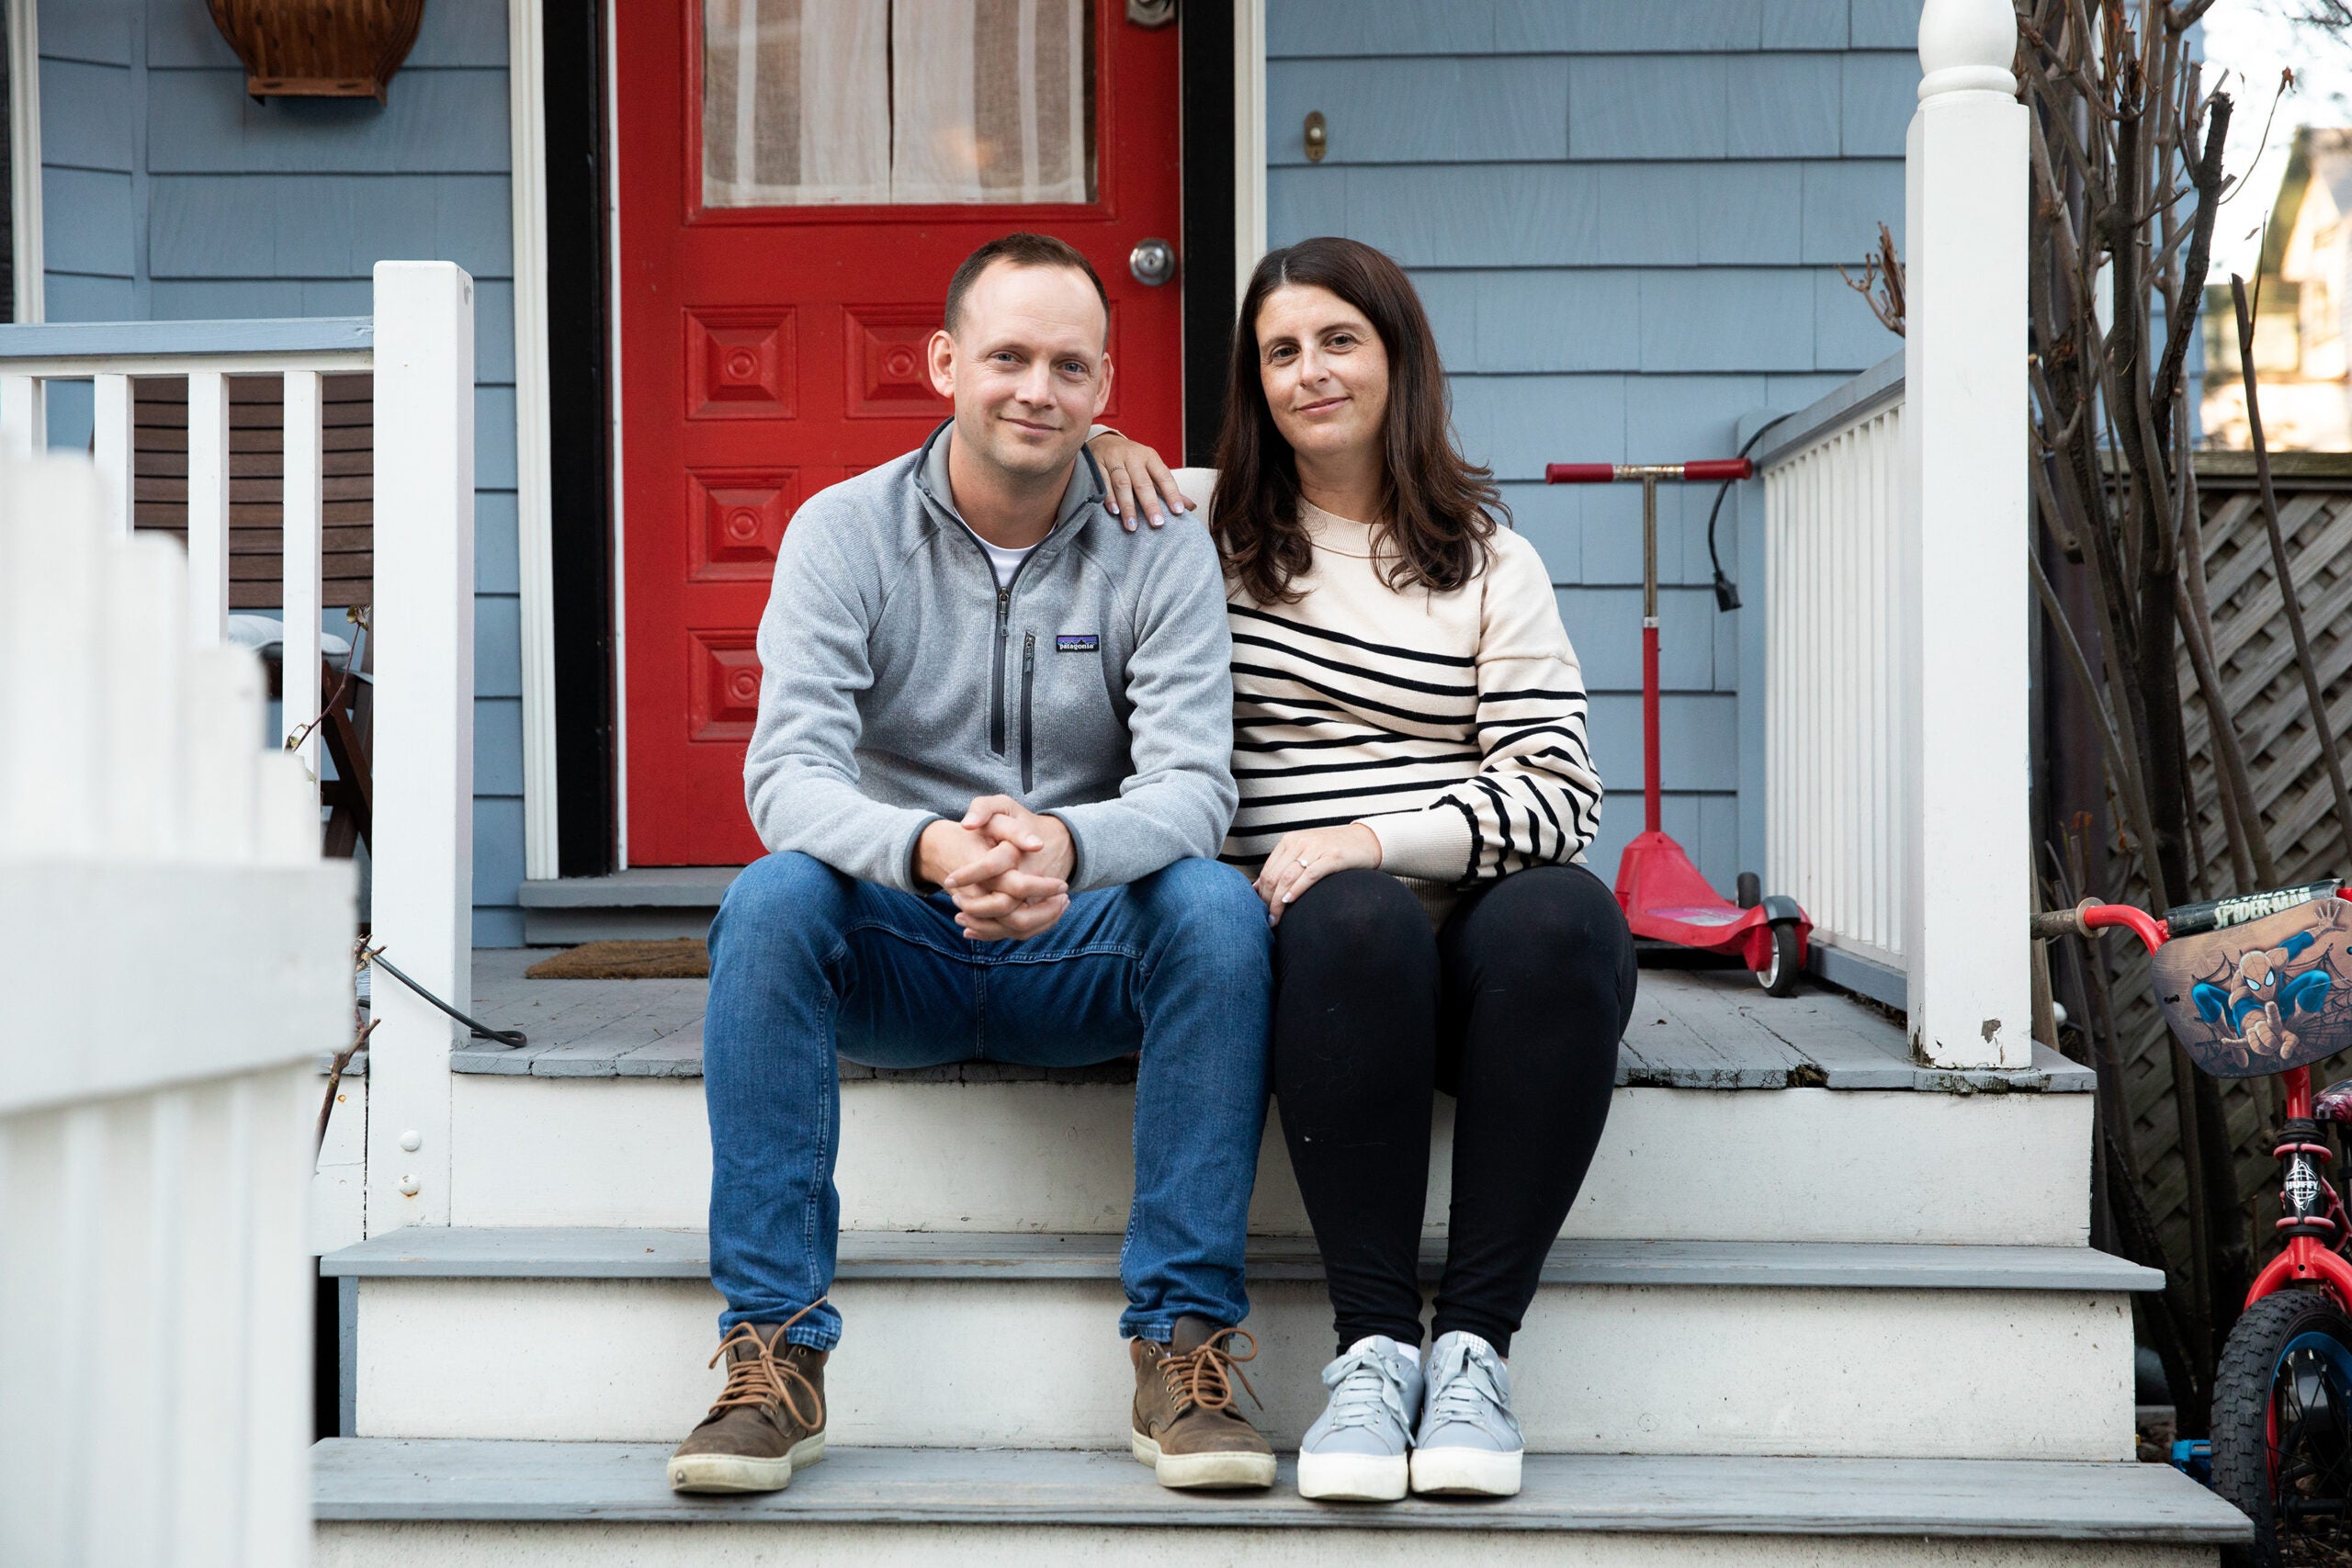 Nick Herbold and Christianne Sharr, Ricardo’s first foster parents, at their home in Cambridge, Mass.